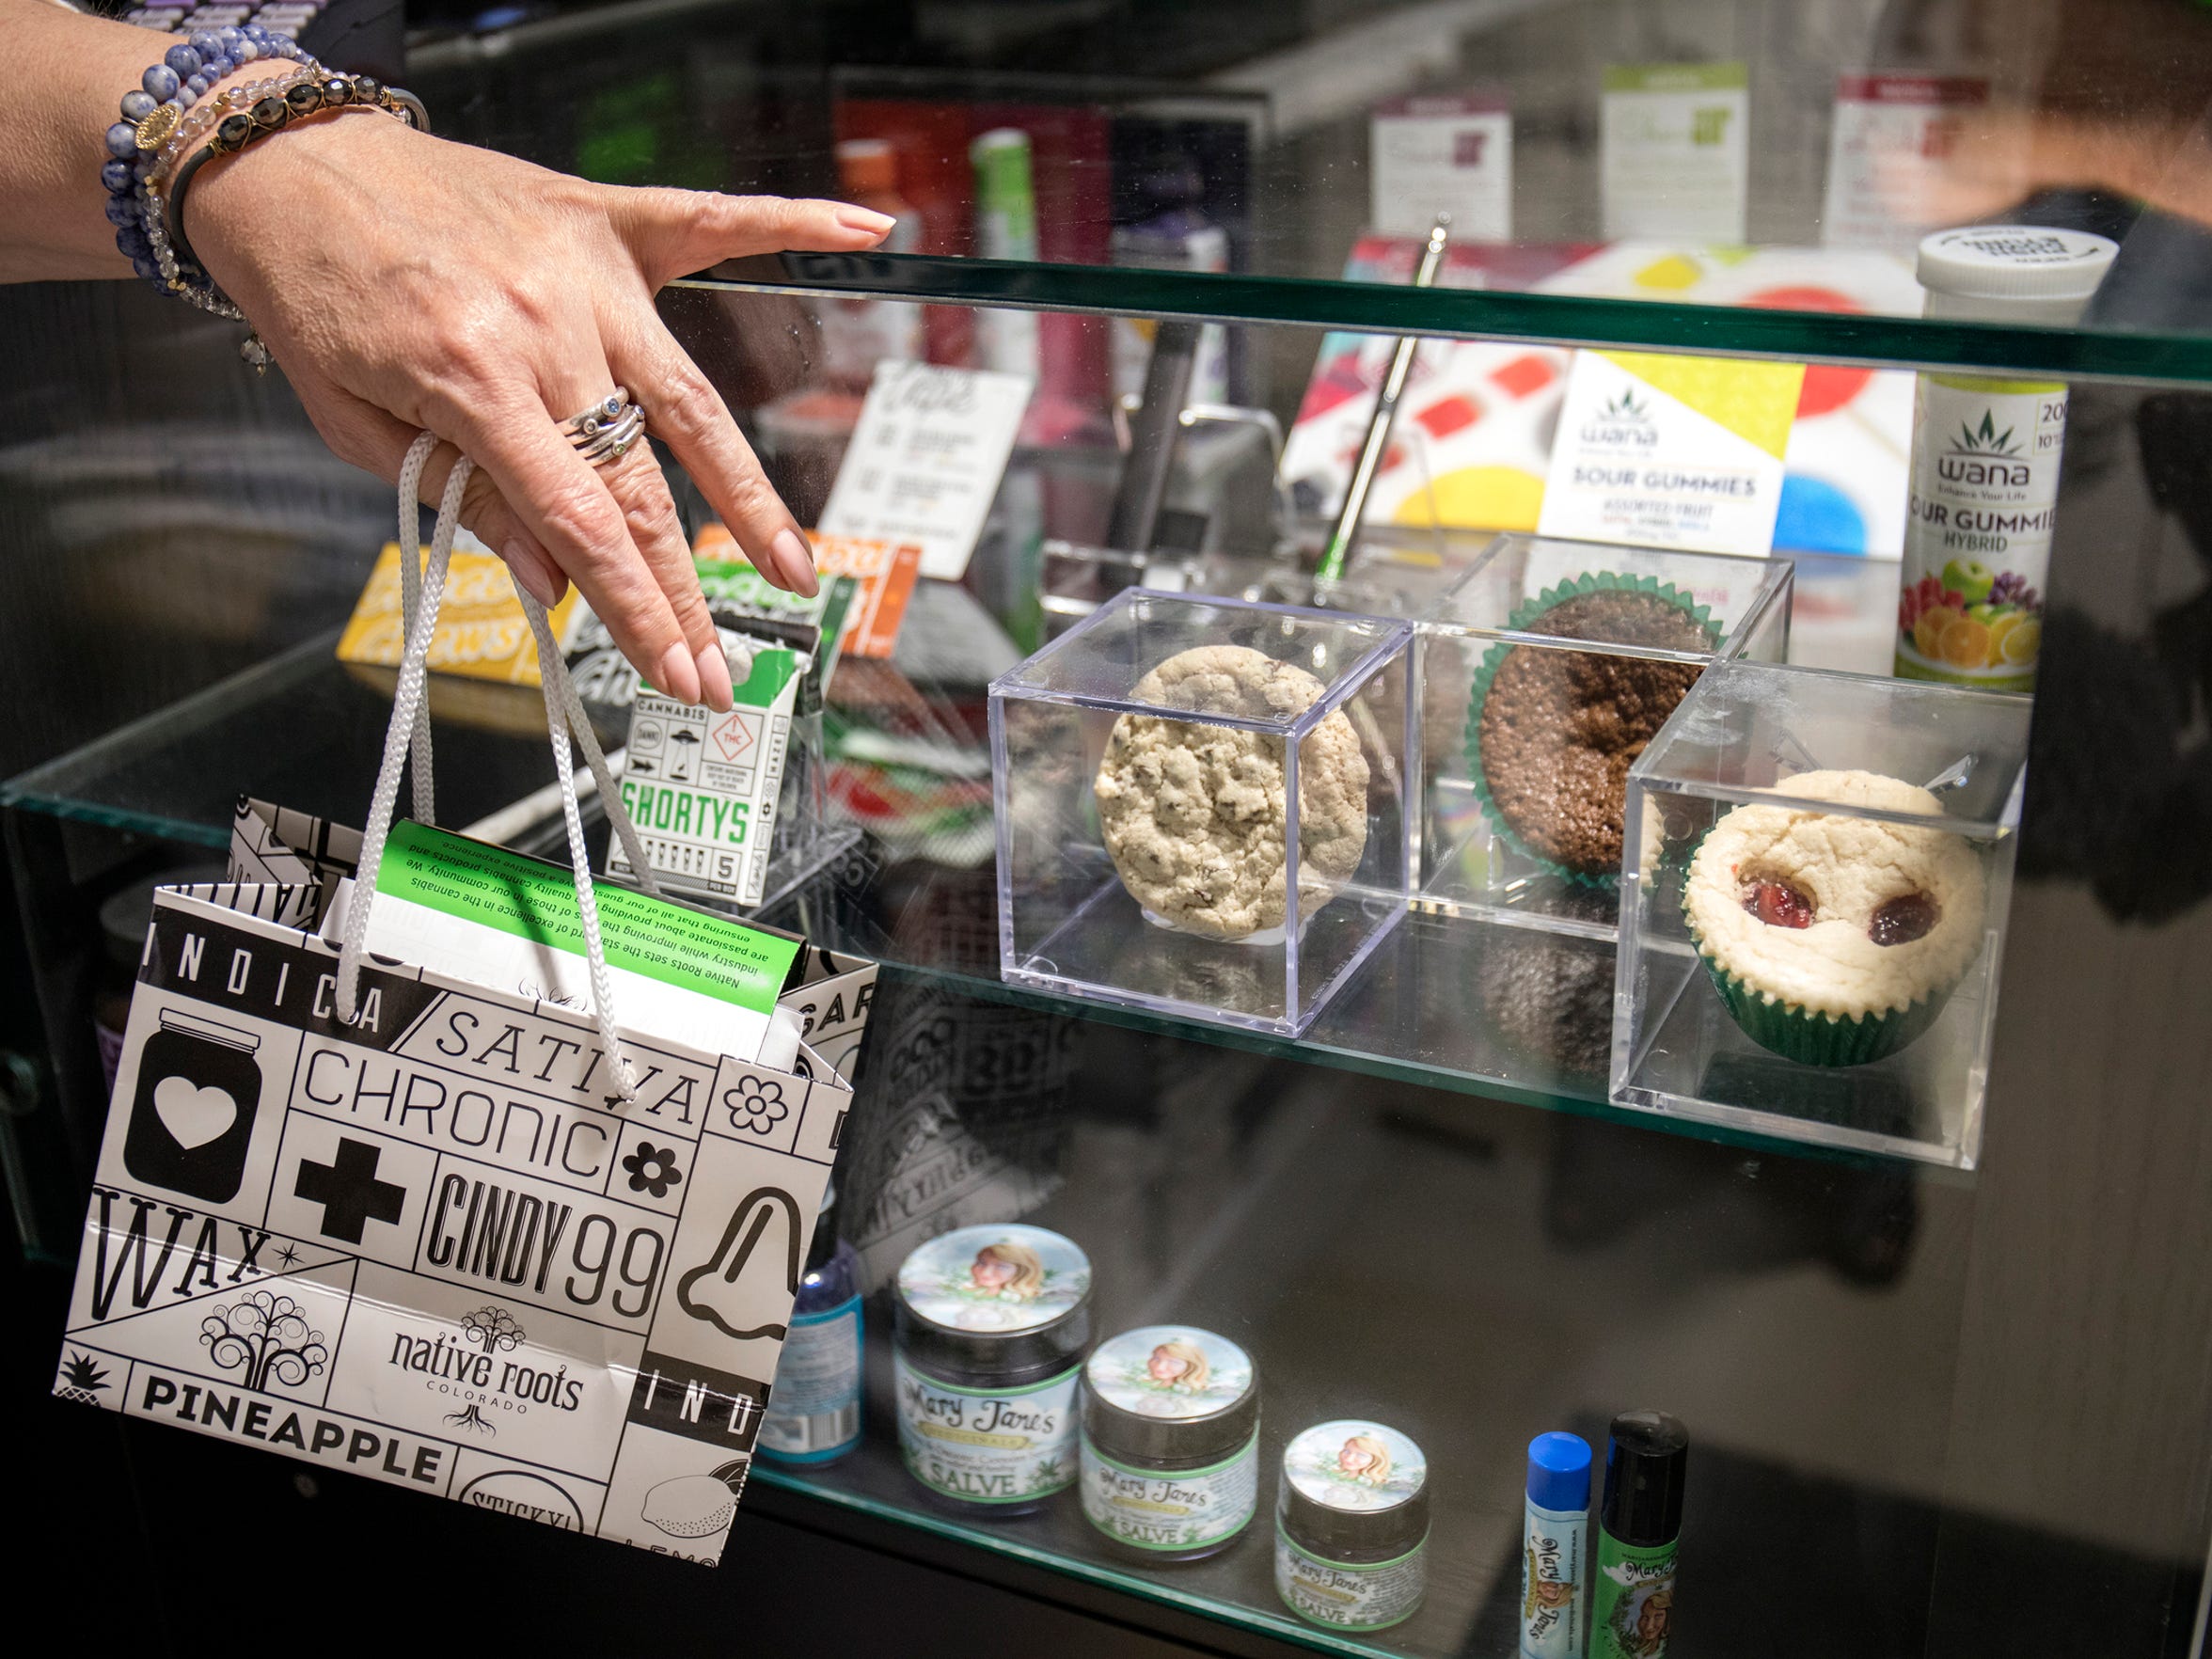 A customer chats with a budtender about various edibles